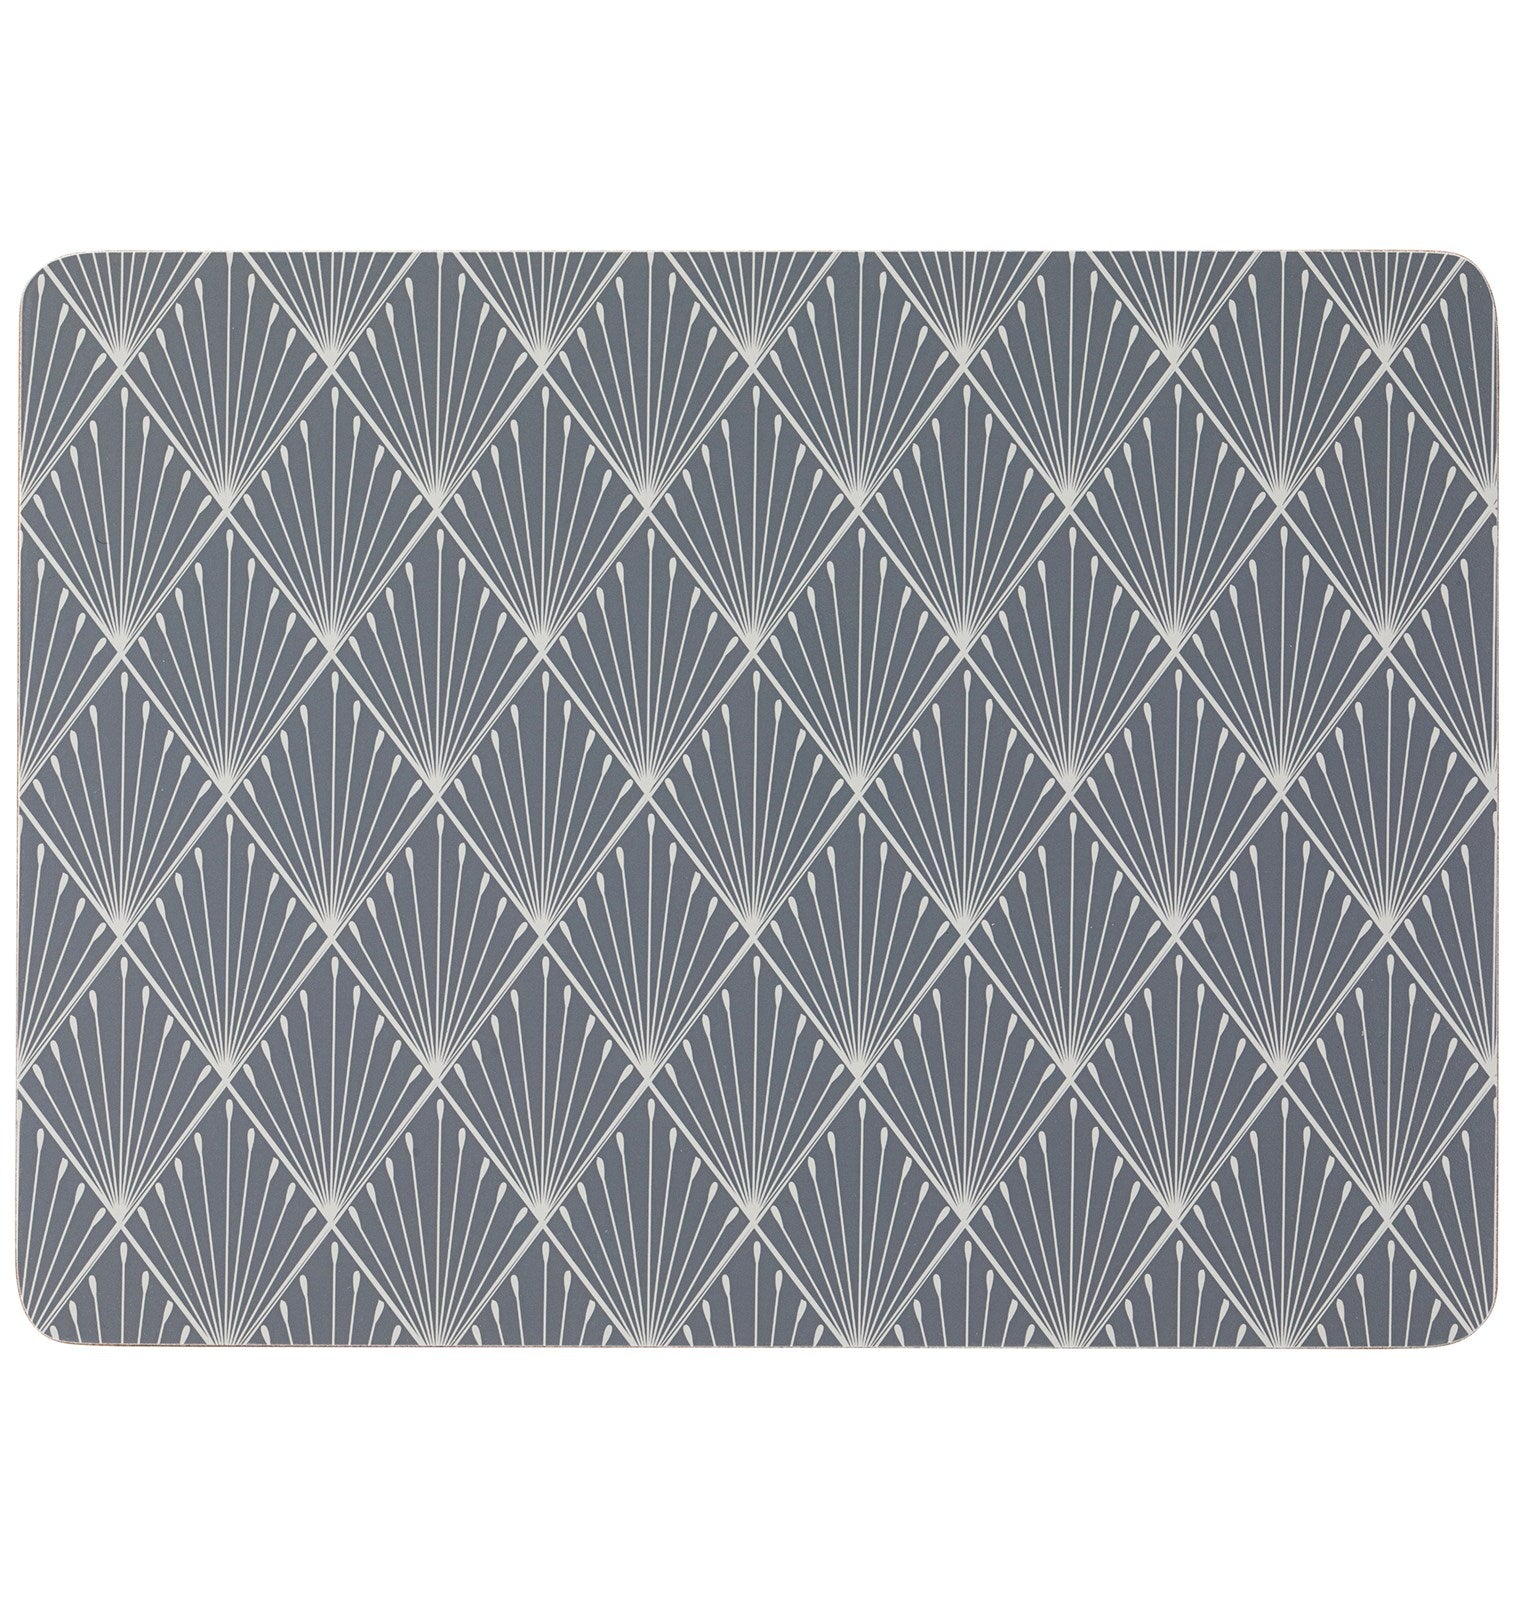 The English Tableware Company Geometric Set of 4pk Placemats